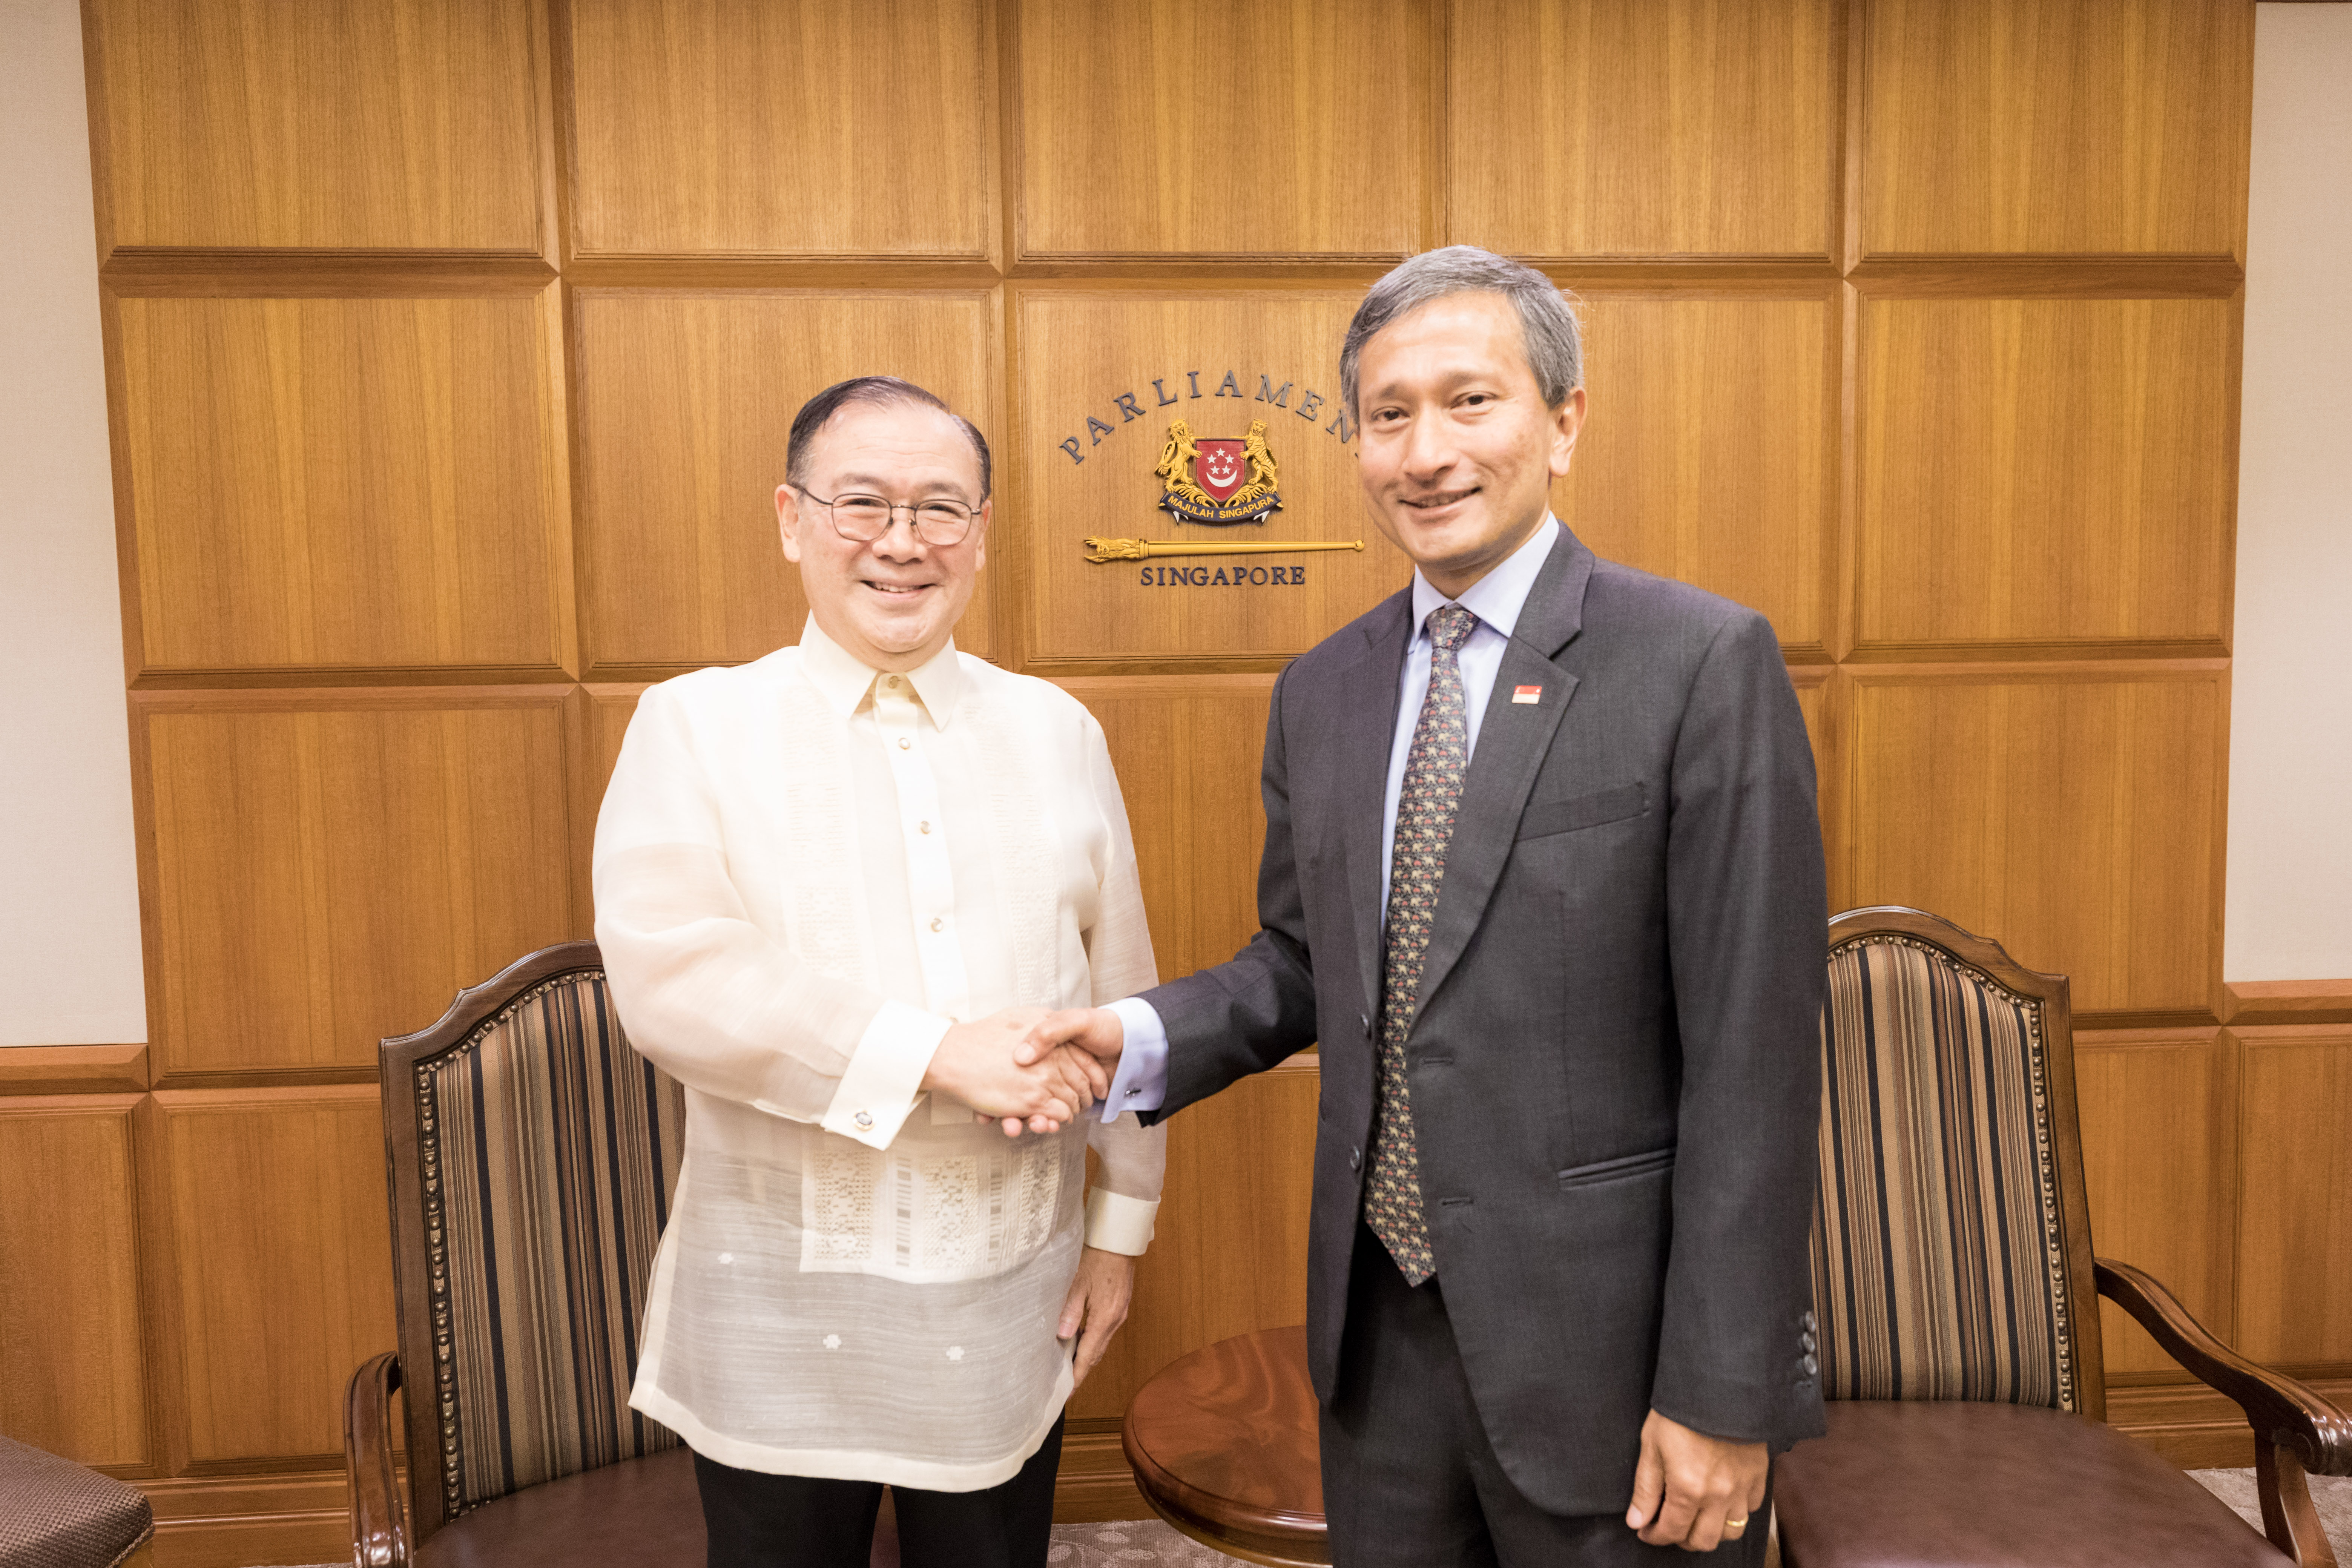 Bilateral meeting between Secretary of Foreign Affairs of the Republic of the Philippines Teodoro L Locsin, Jr. and Minister for Foreign Affairs Dr Vivian Balakrishnan, 8 May 2019